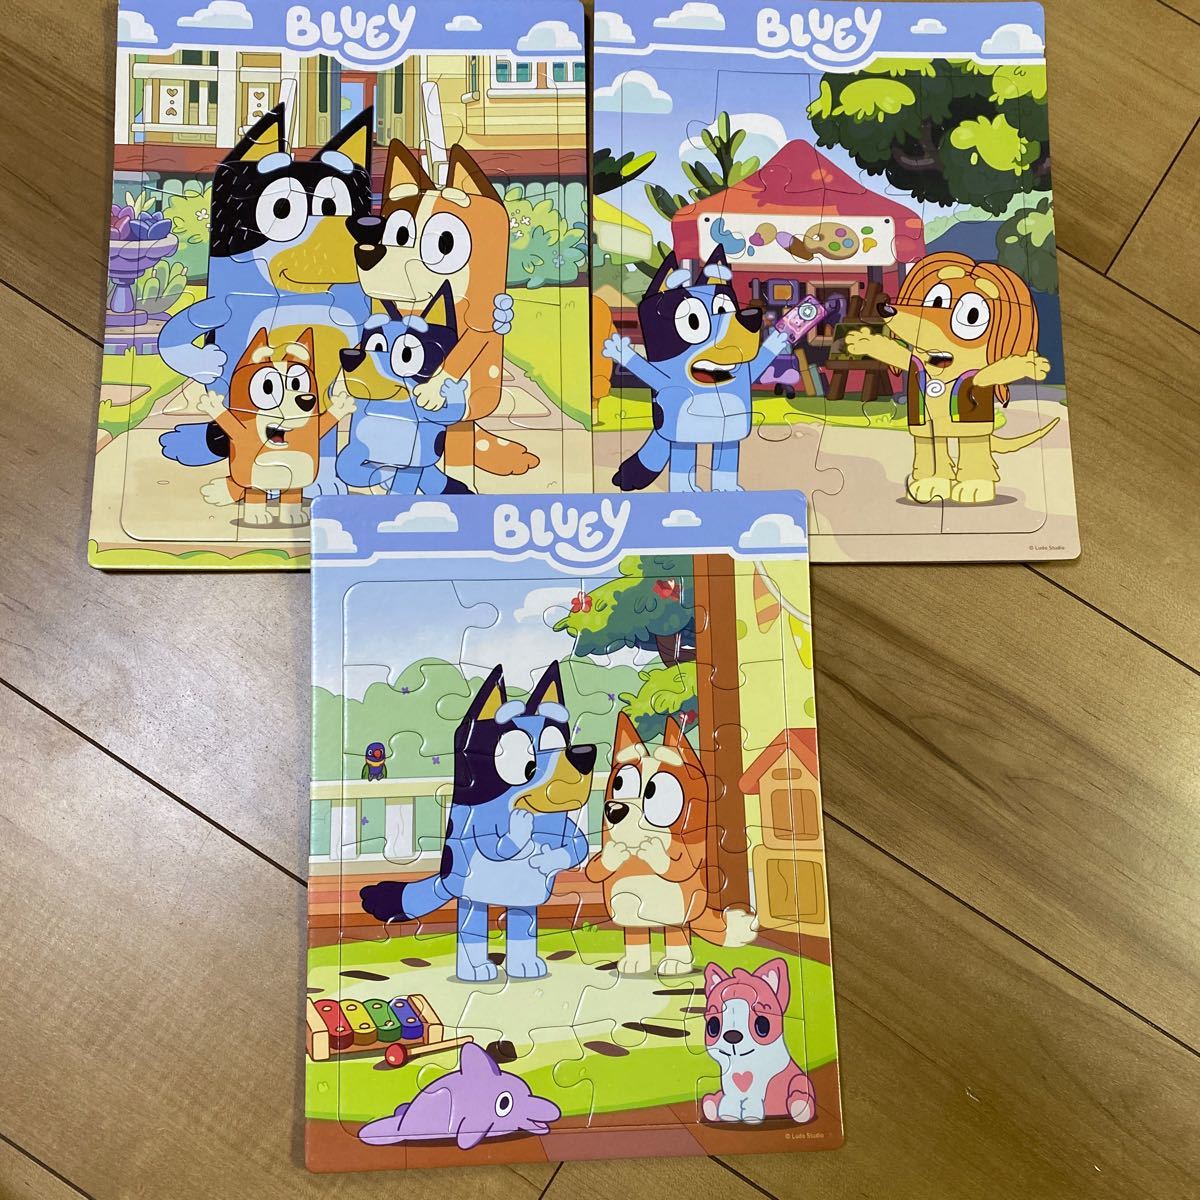  abroad anime blue iBluey puzzle set 3 sheets PRE SCHOOL PUZZLES intellectual training toy 